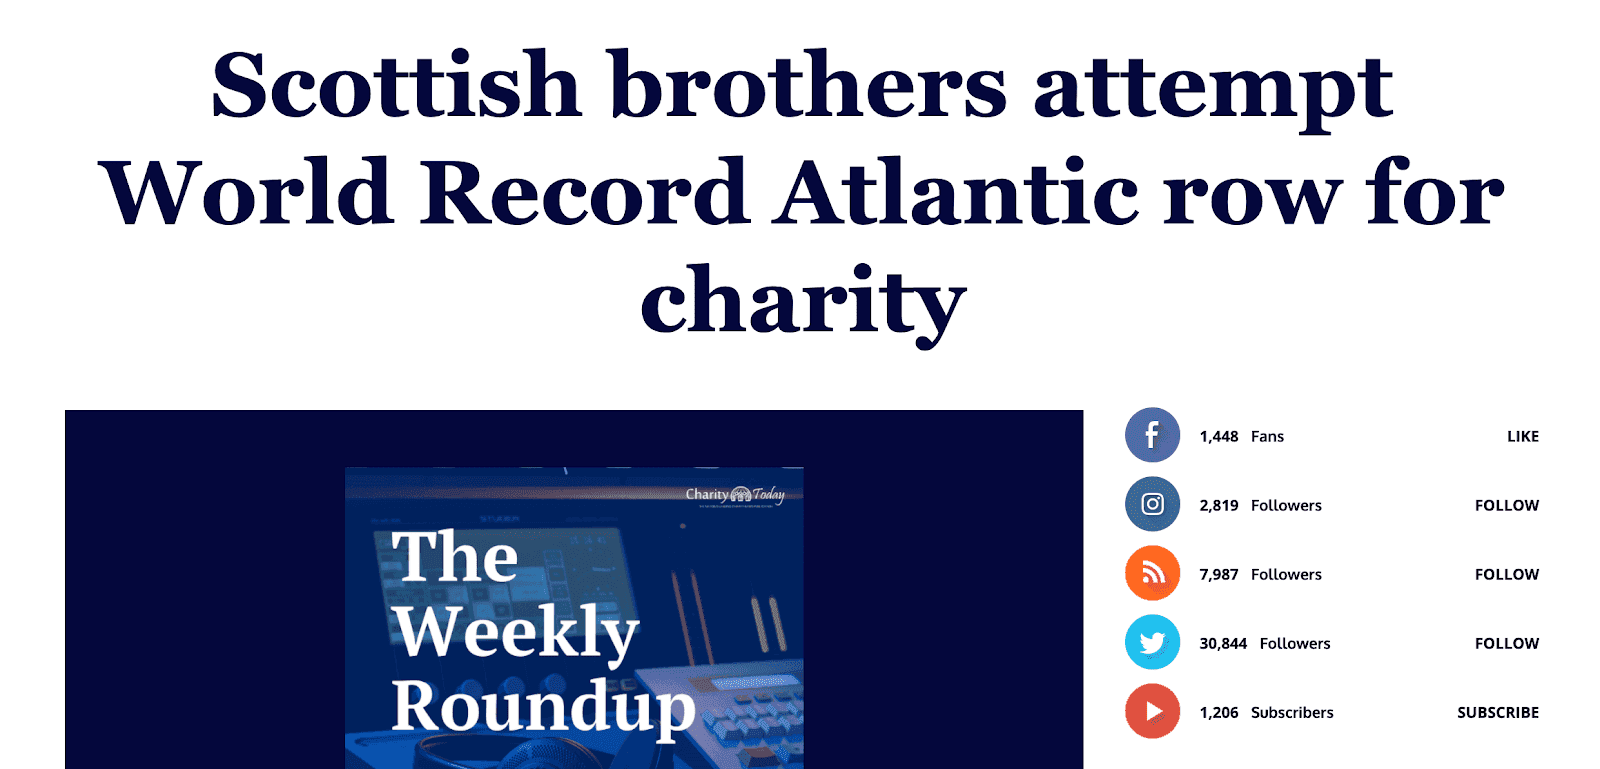 A Weekly Roundup article on a new charity.